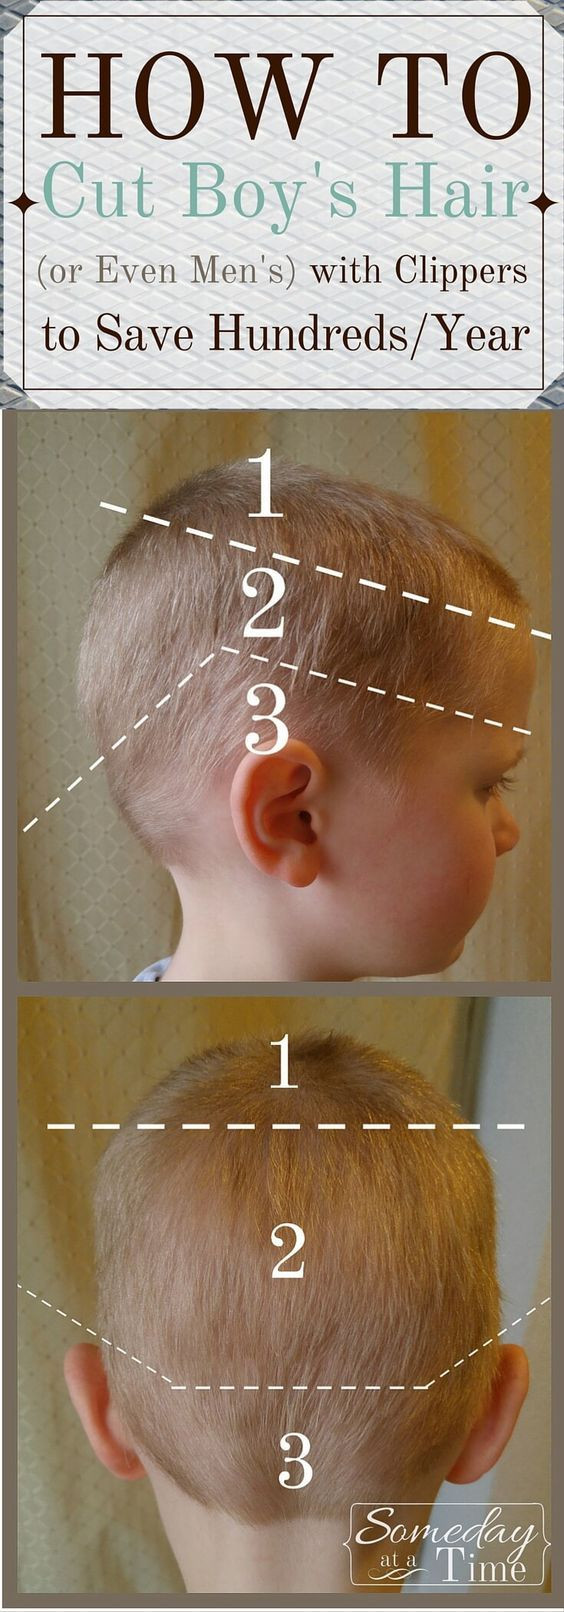 How To Cut Boy Hair
 How to Cut Boy s Hair or Even Men s with Clippers